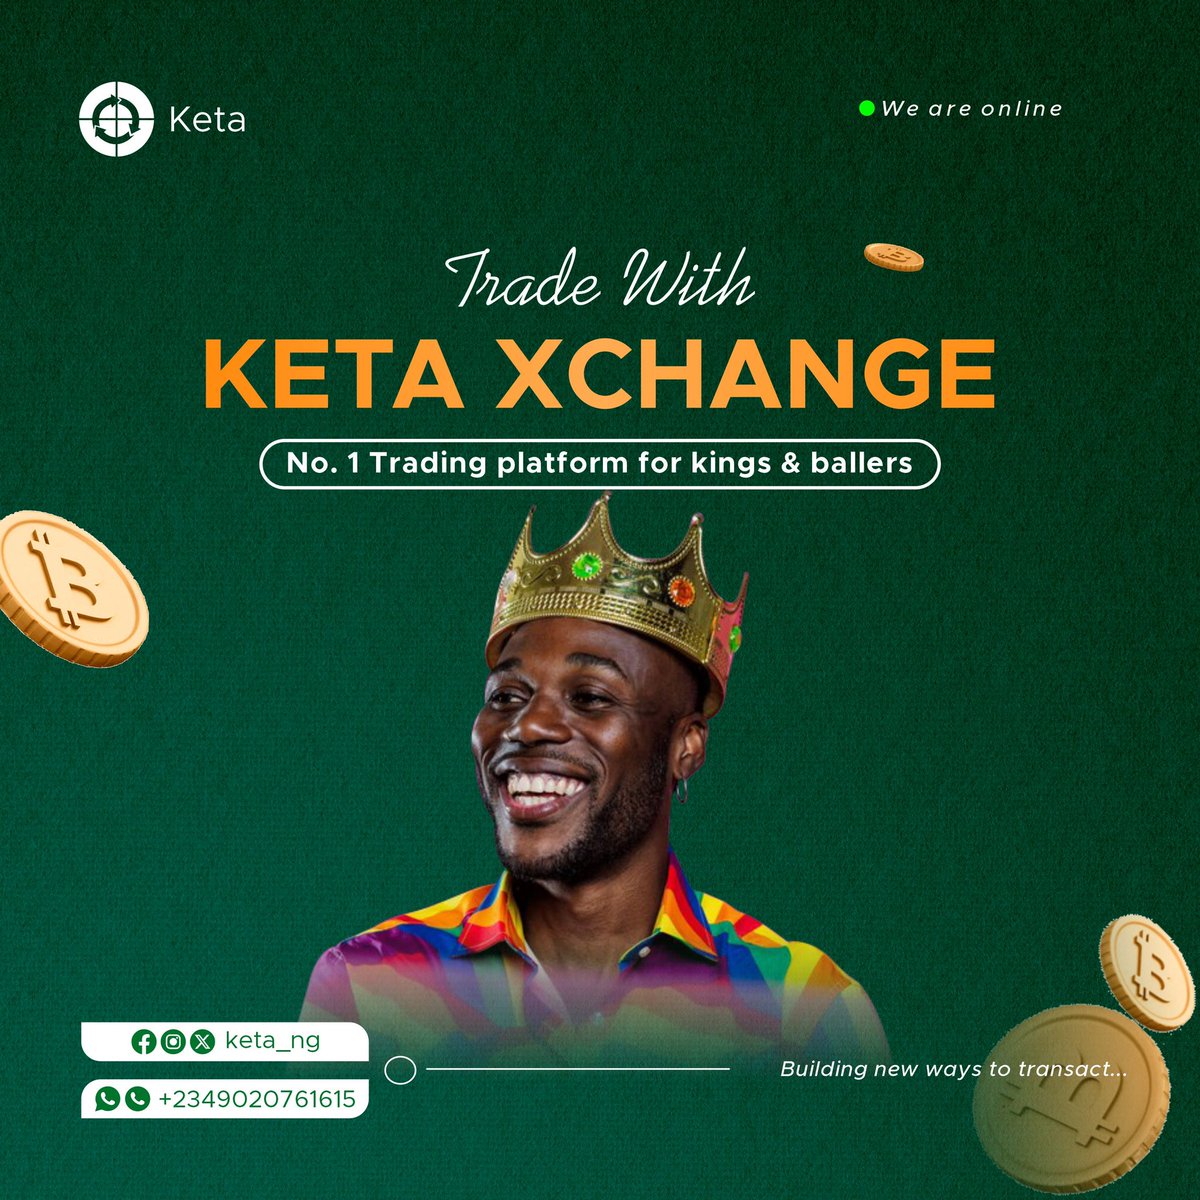 If you’re looking for a place to trade your crypto gift cards, Keta Exchange is the number 1 choice in Africa.
Start trading by clicking the link in our bio to connect directly with us via WhatsApp.

Let’s get those transactions rolling! 
#keta__ng #fastandreliable